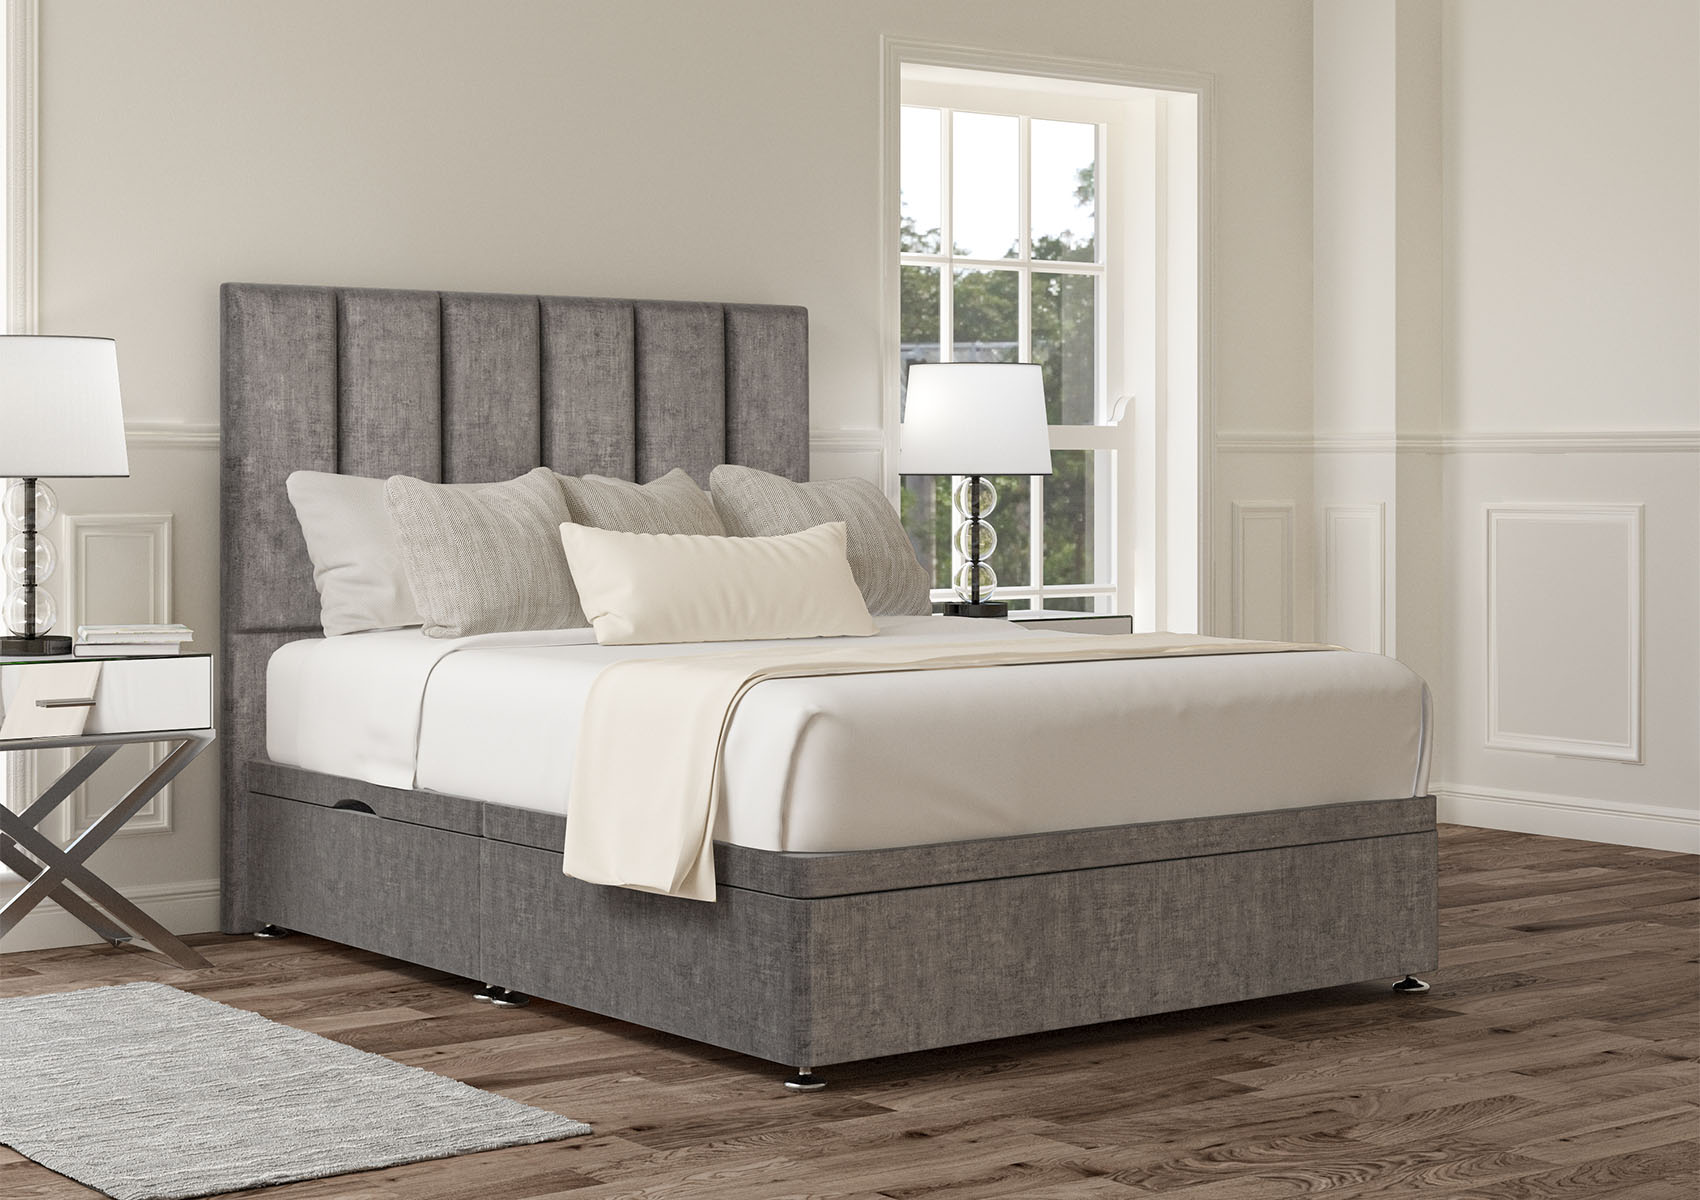 View Empire Carina Parchment Upholstered Single Ottoman Bed Time4Sleep information